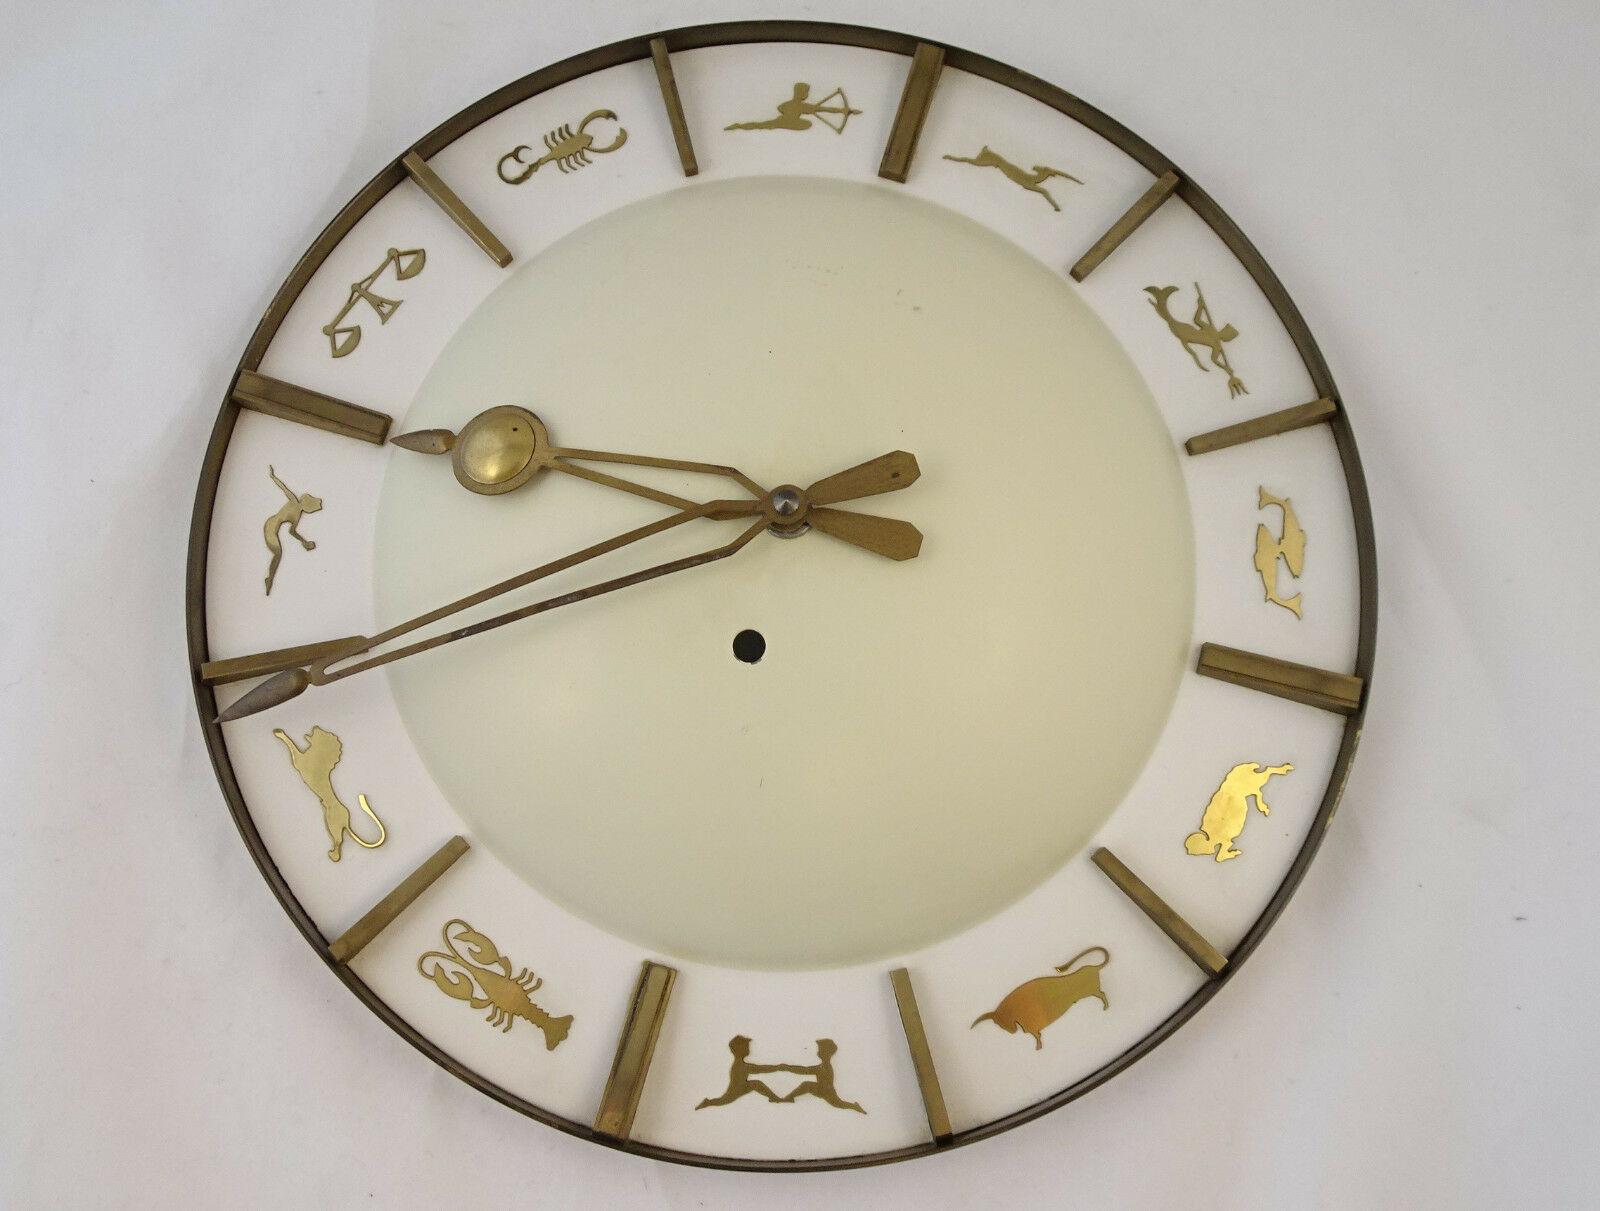 Junghans brass wall clock with zodiac signs.
Fitted with quartz movement working with a standard AAA battery.